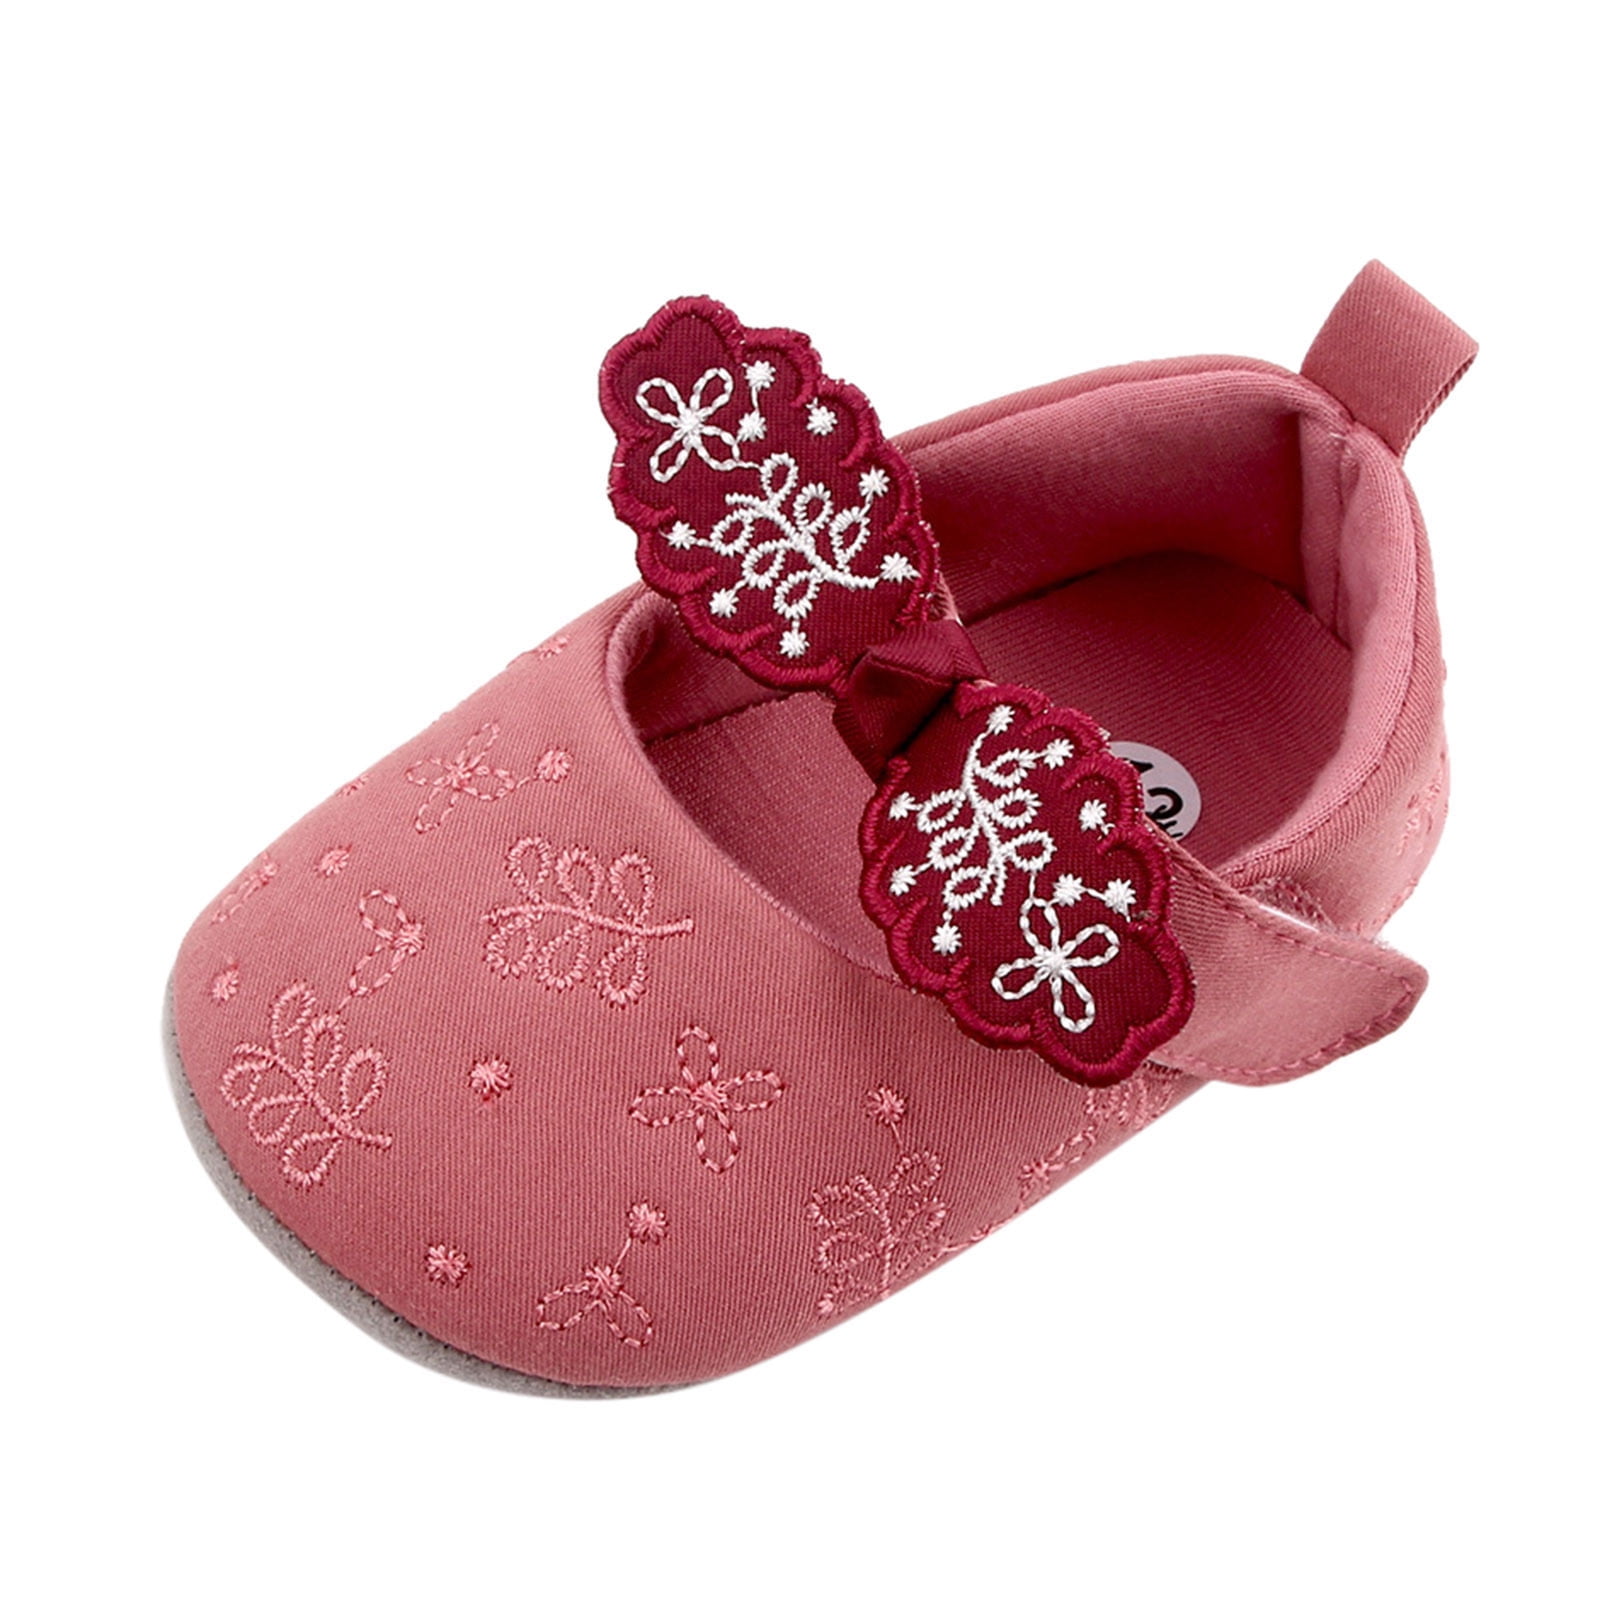 JDEFEG Toddler Girl Shoes Size 8 Girls Bow Shoes Baby Floral Non